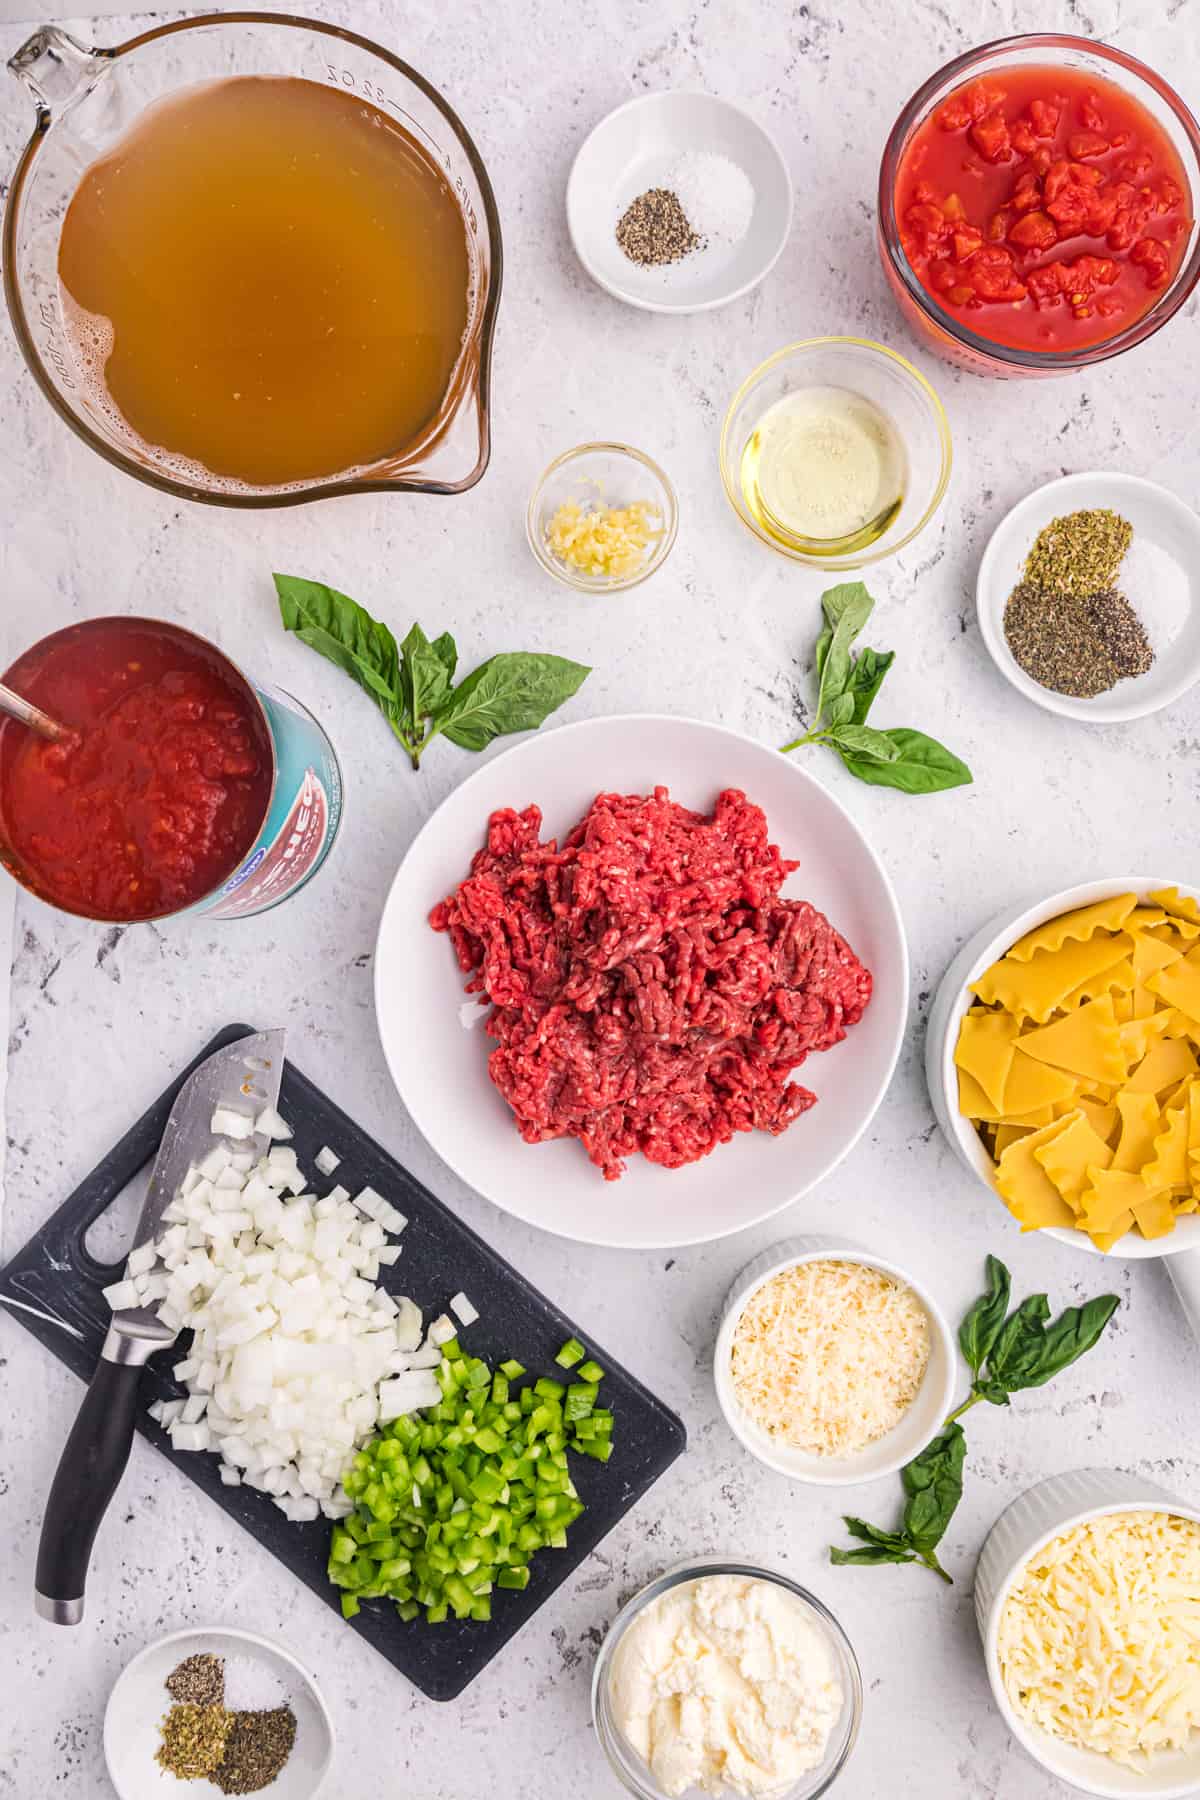 The ingredients for lasagna soup are placed on a white countertop.